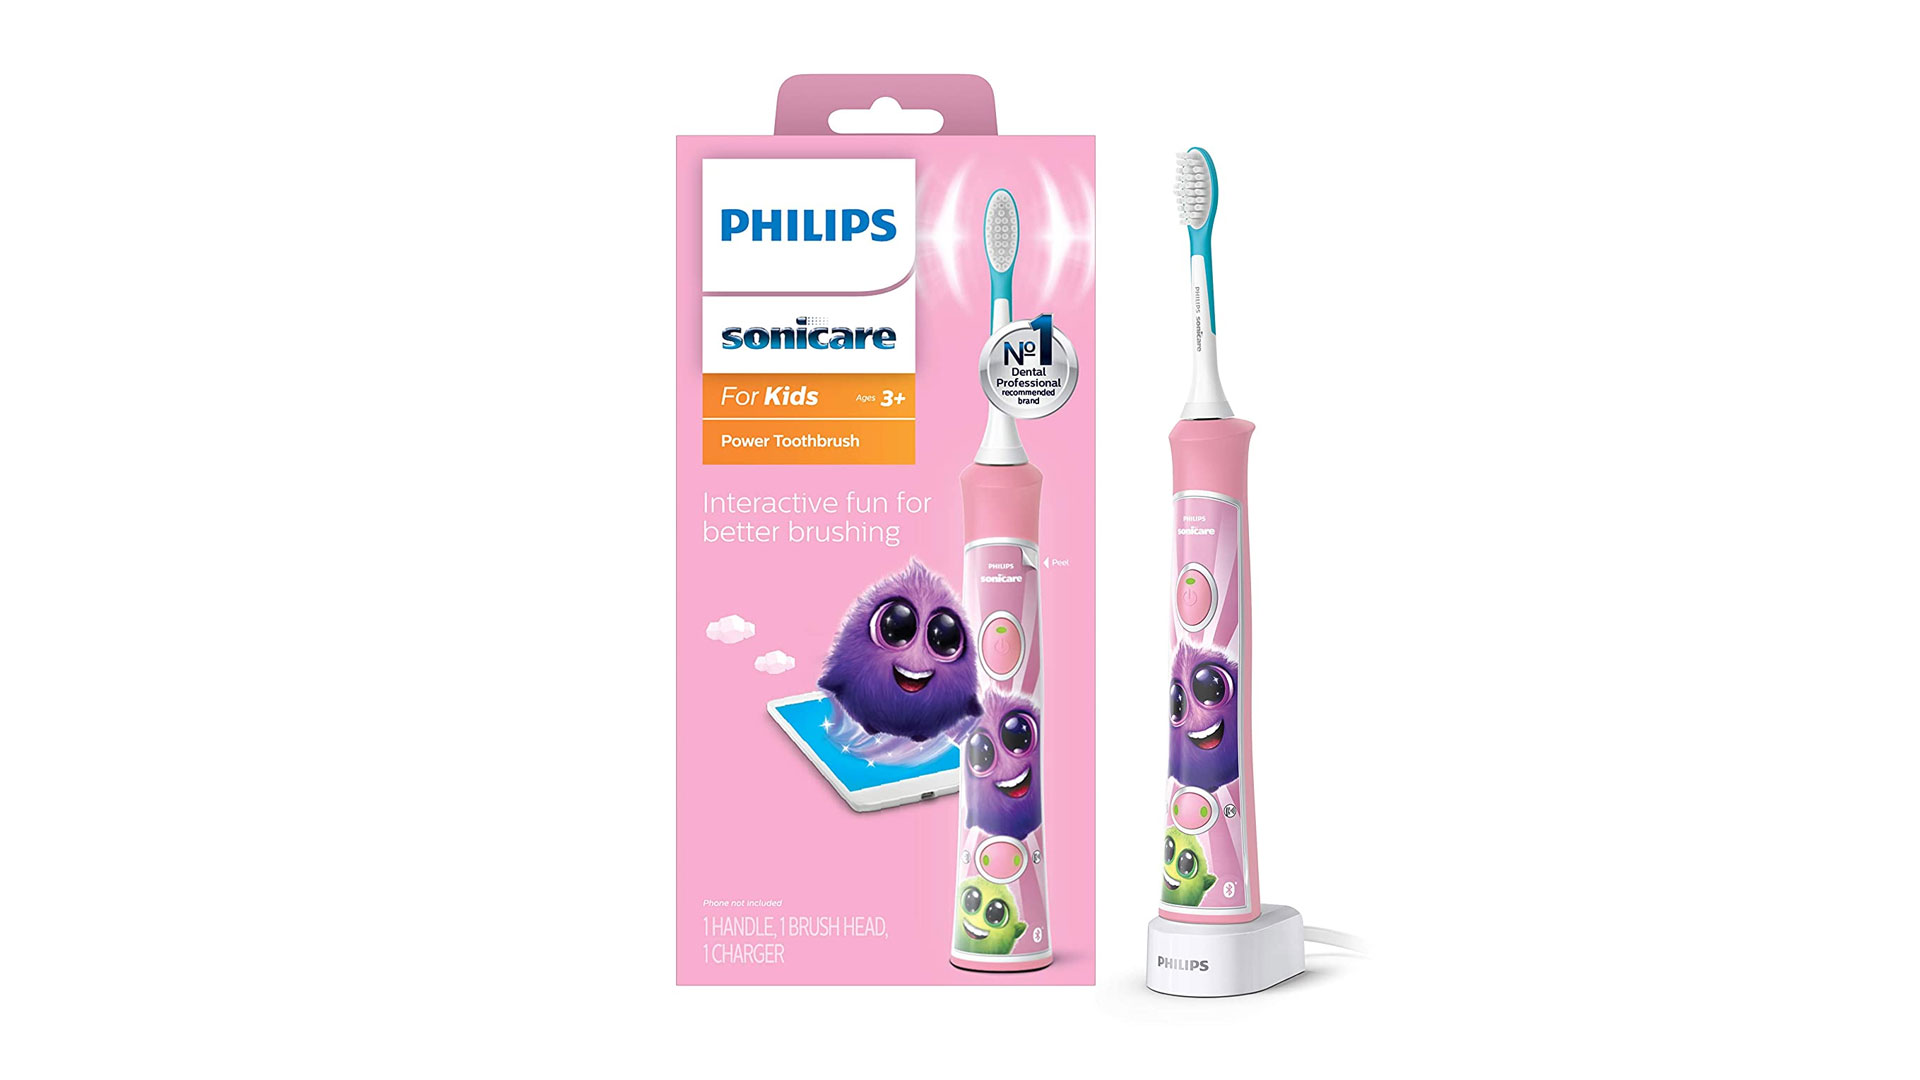 Philips electric toothbrush deals: Philips Sonicare for Kids